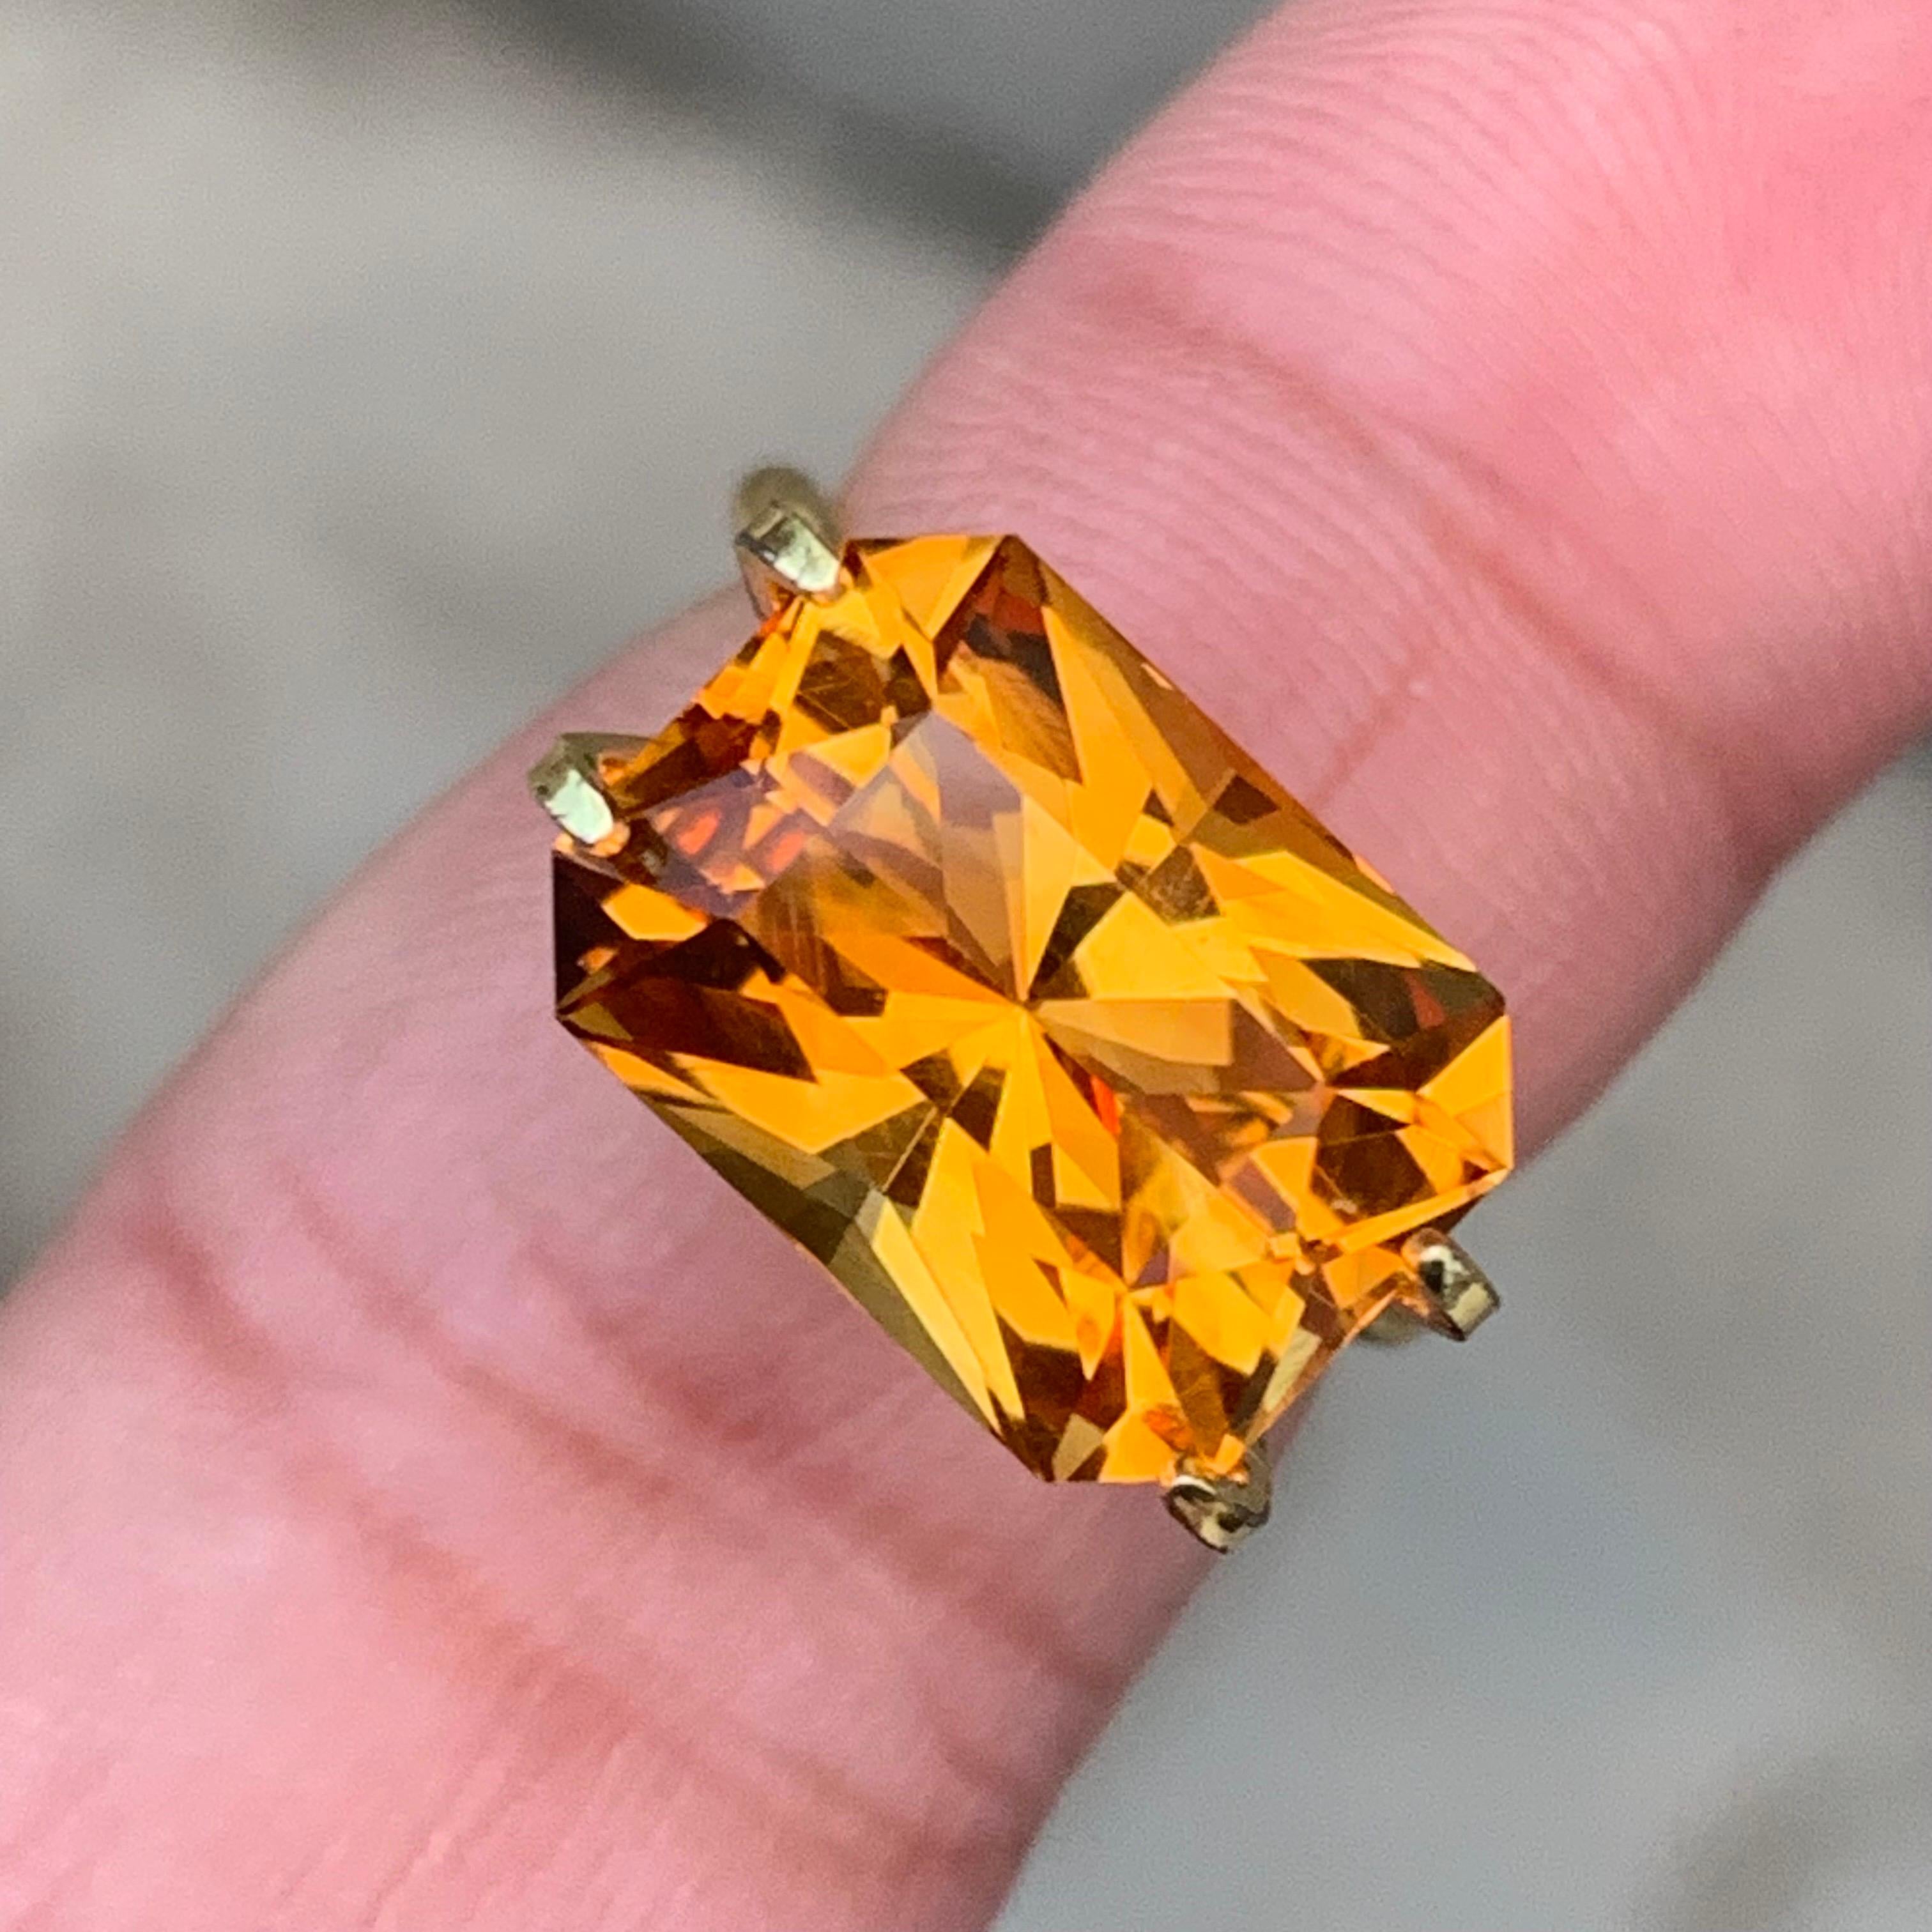 Loose Mandarin Citrine
Weight: 6.40 Carats
Dimension: 13x9.5x8.1 Mm
Origin; Brazil
Color: Orange
Shape: Emerald
Cut / Facet: Precision
Certificate: On Demand 
.
Citrine is associated with positivity and optimism, which is not surprising given its